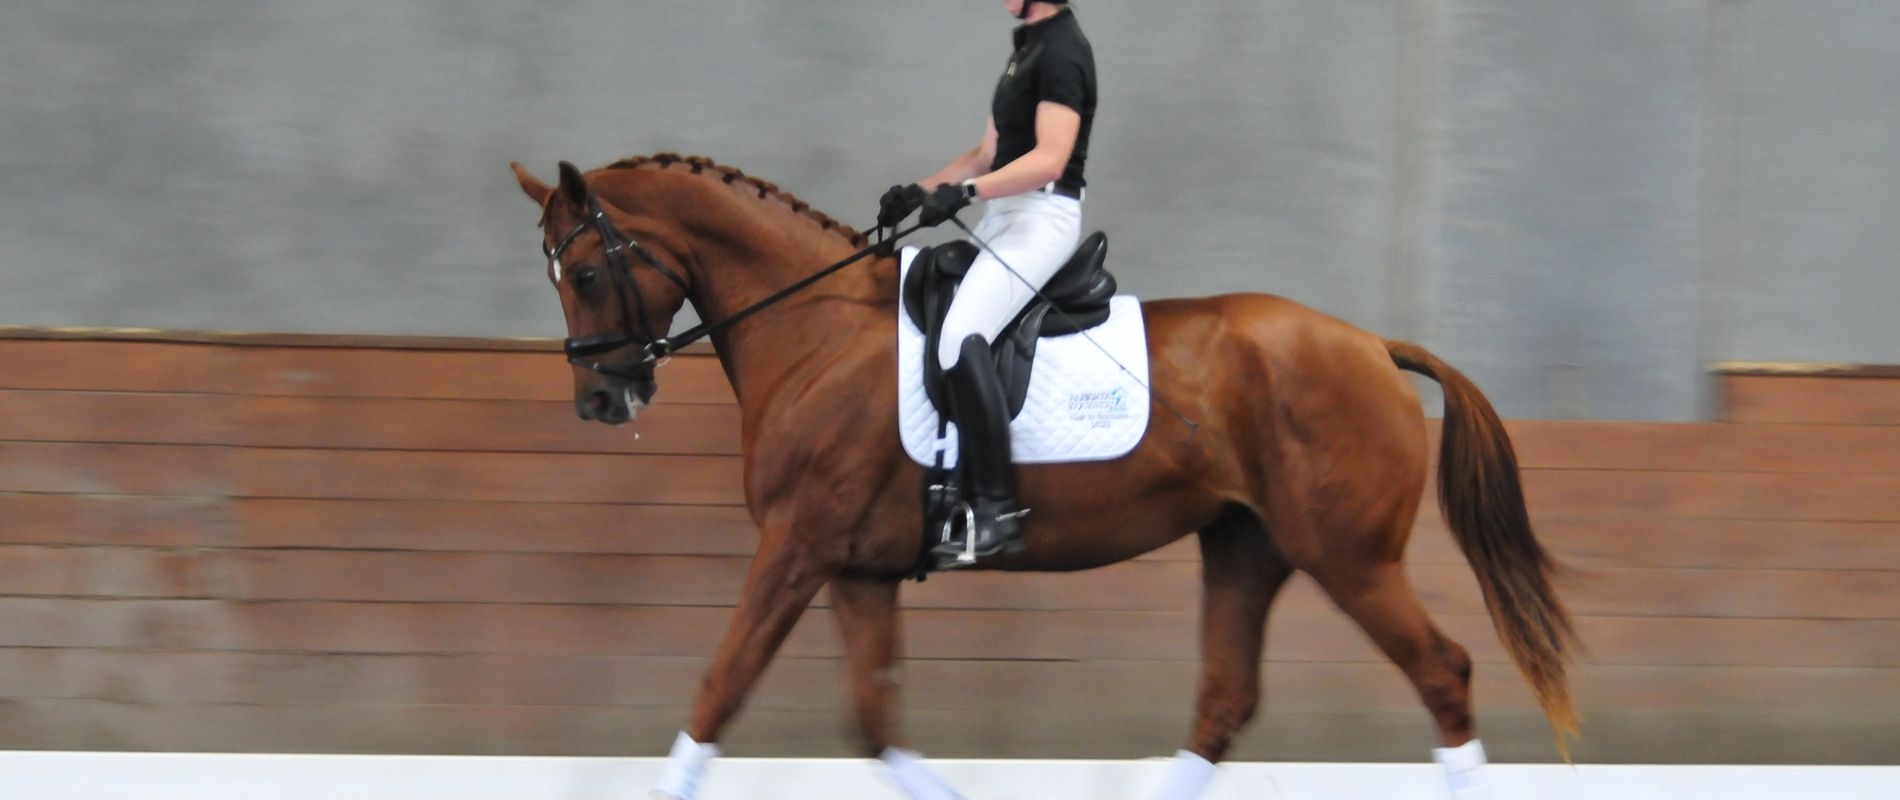 Dressage Horse and rider